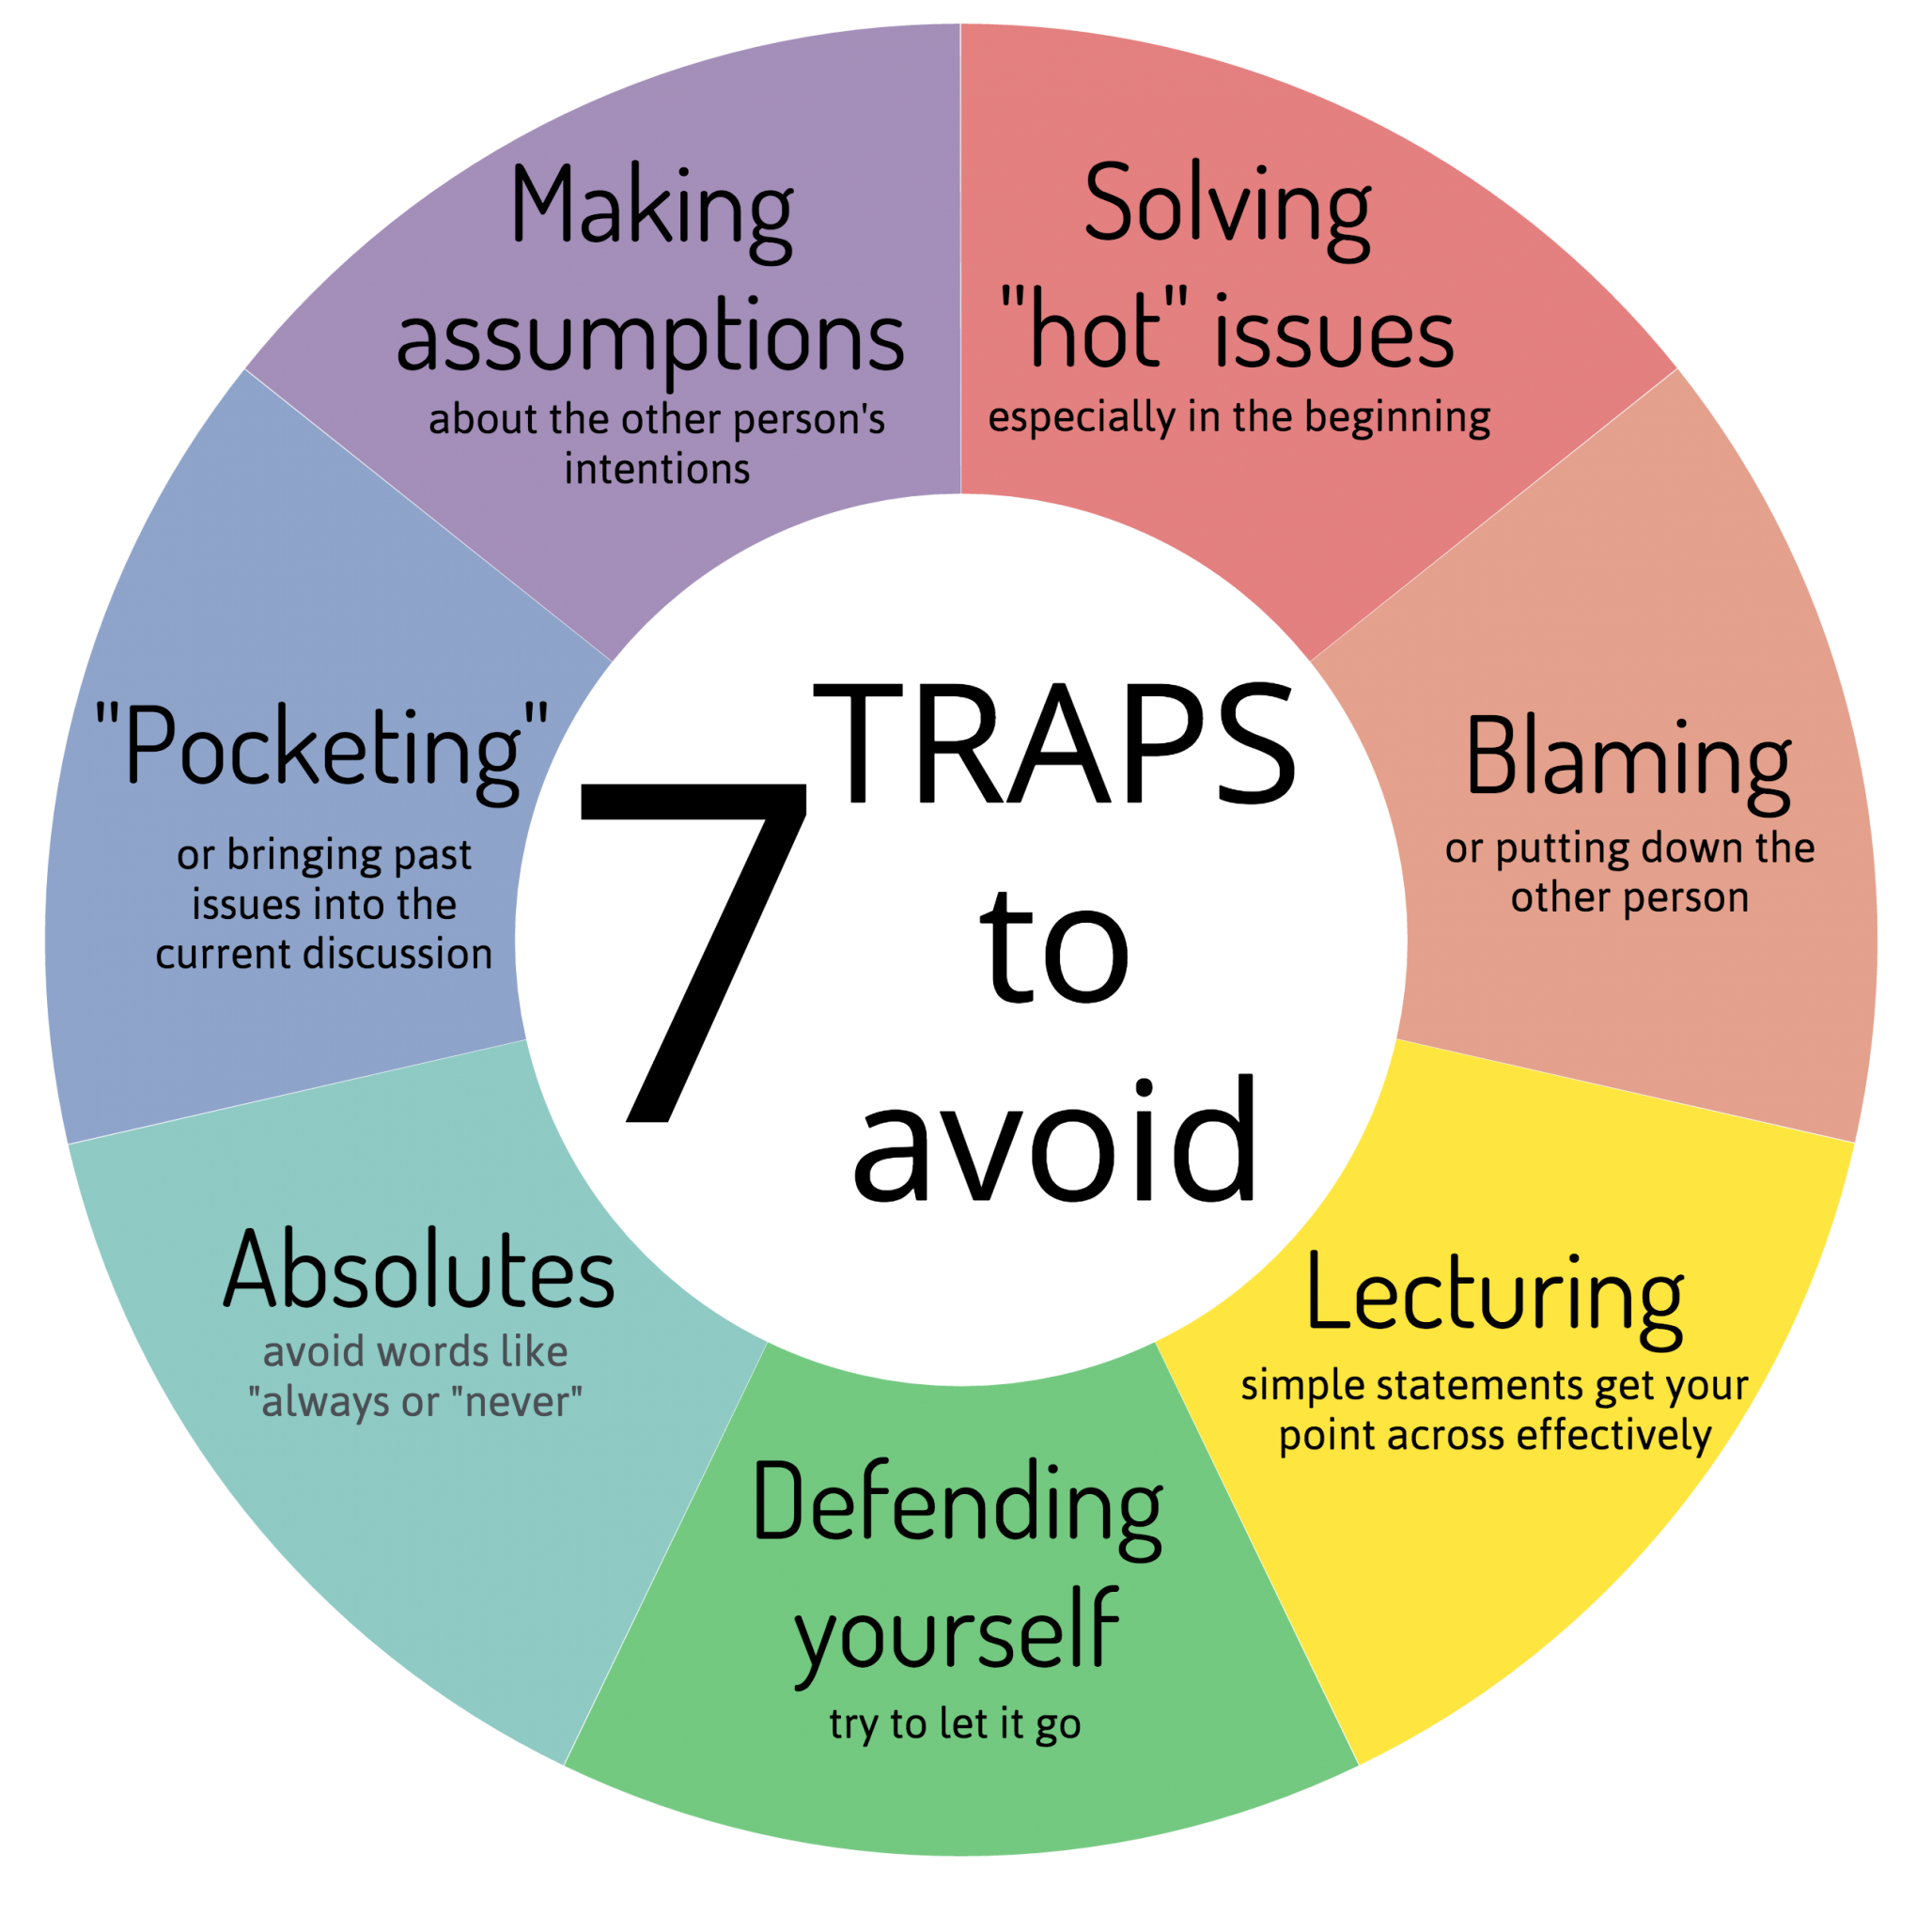 7 traps to avoid: solving "hot" issues, blaming, lecturing, defending yourself, using absolutes, pocketing, making assumptions